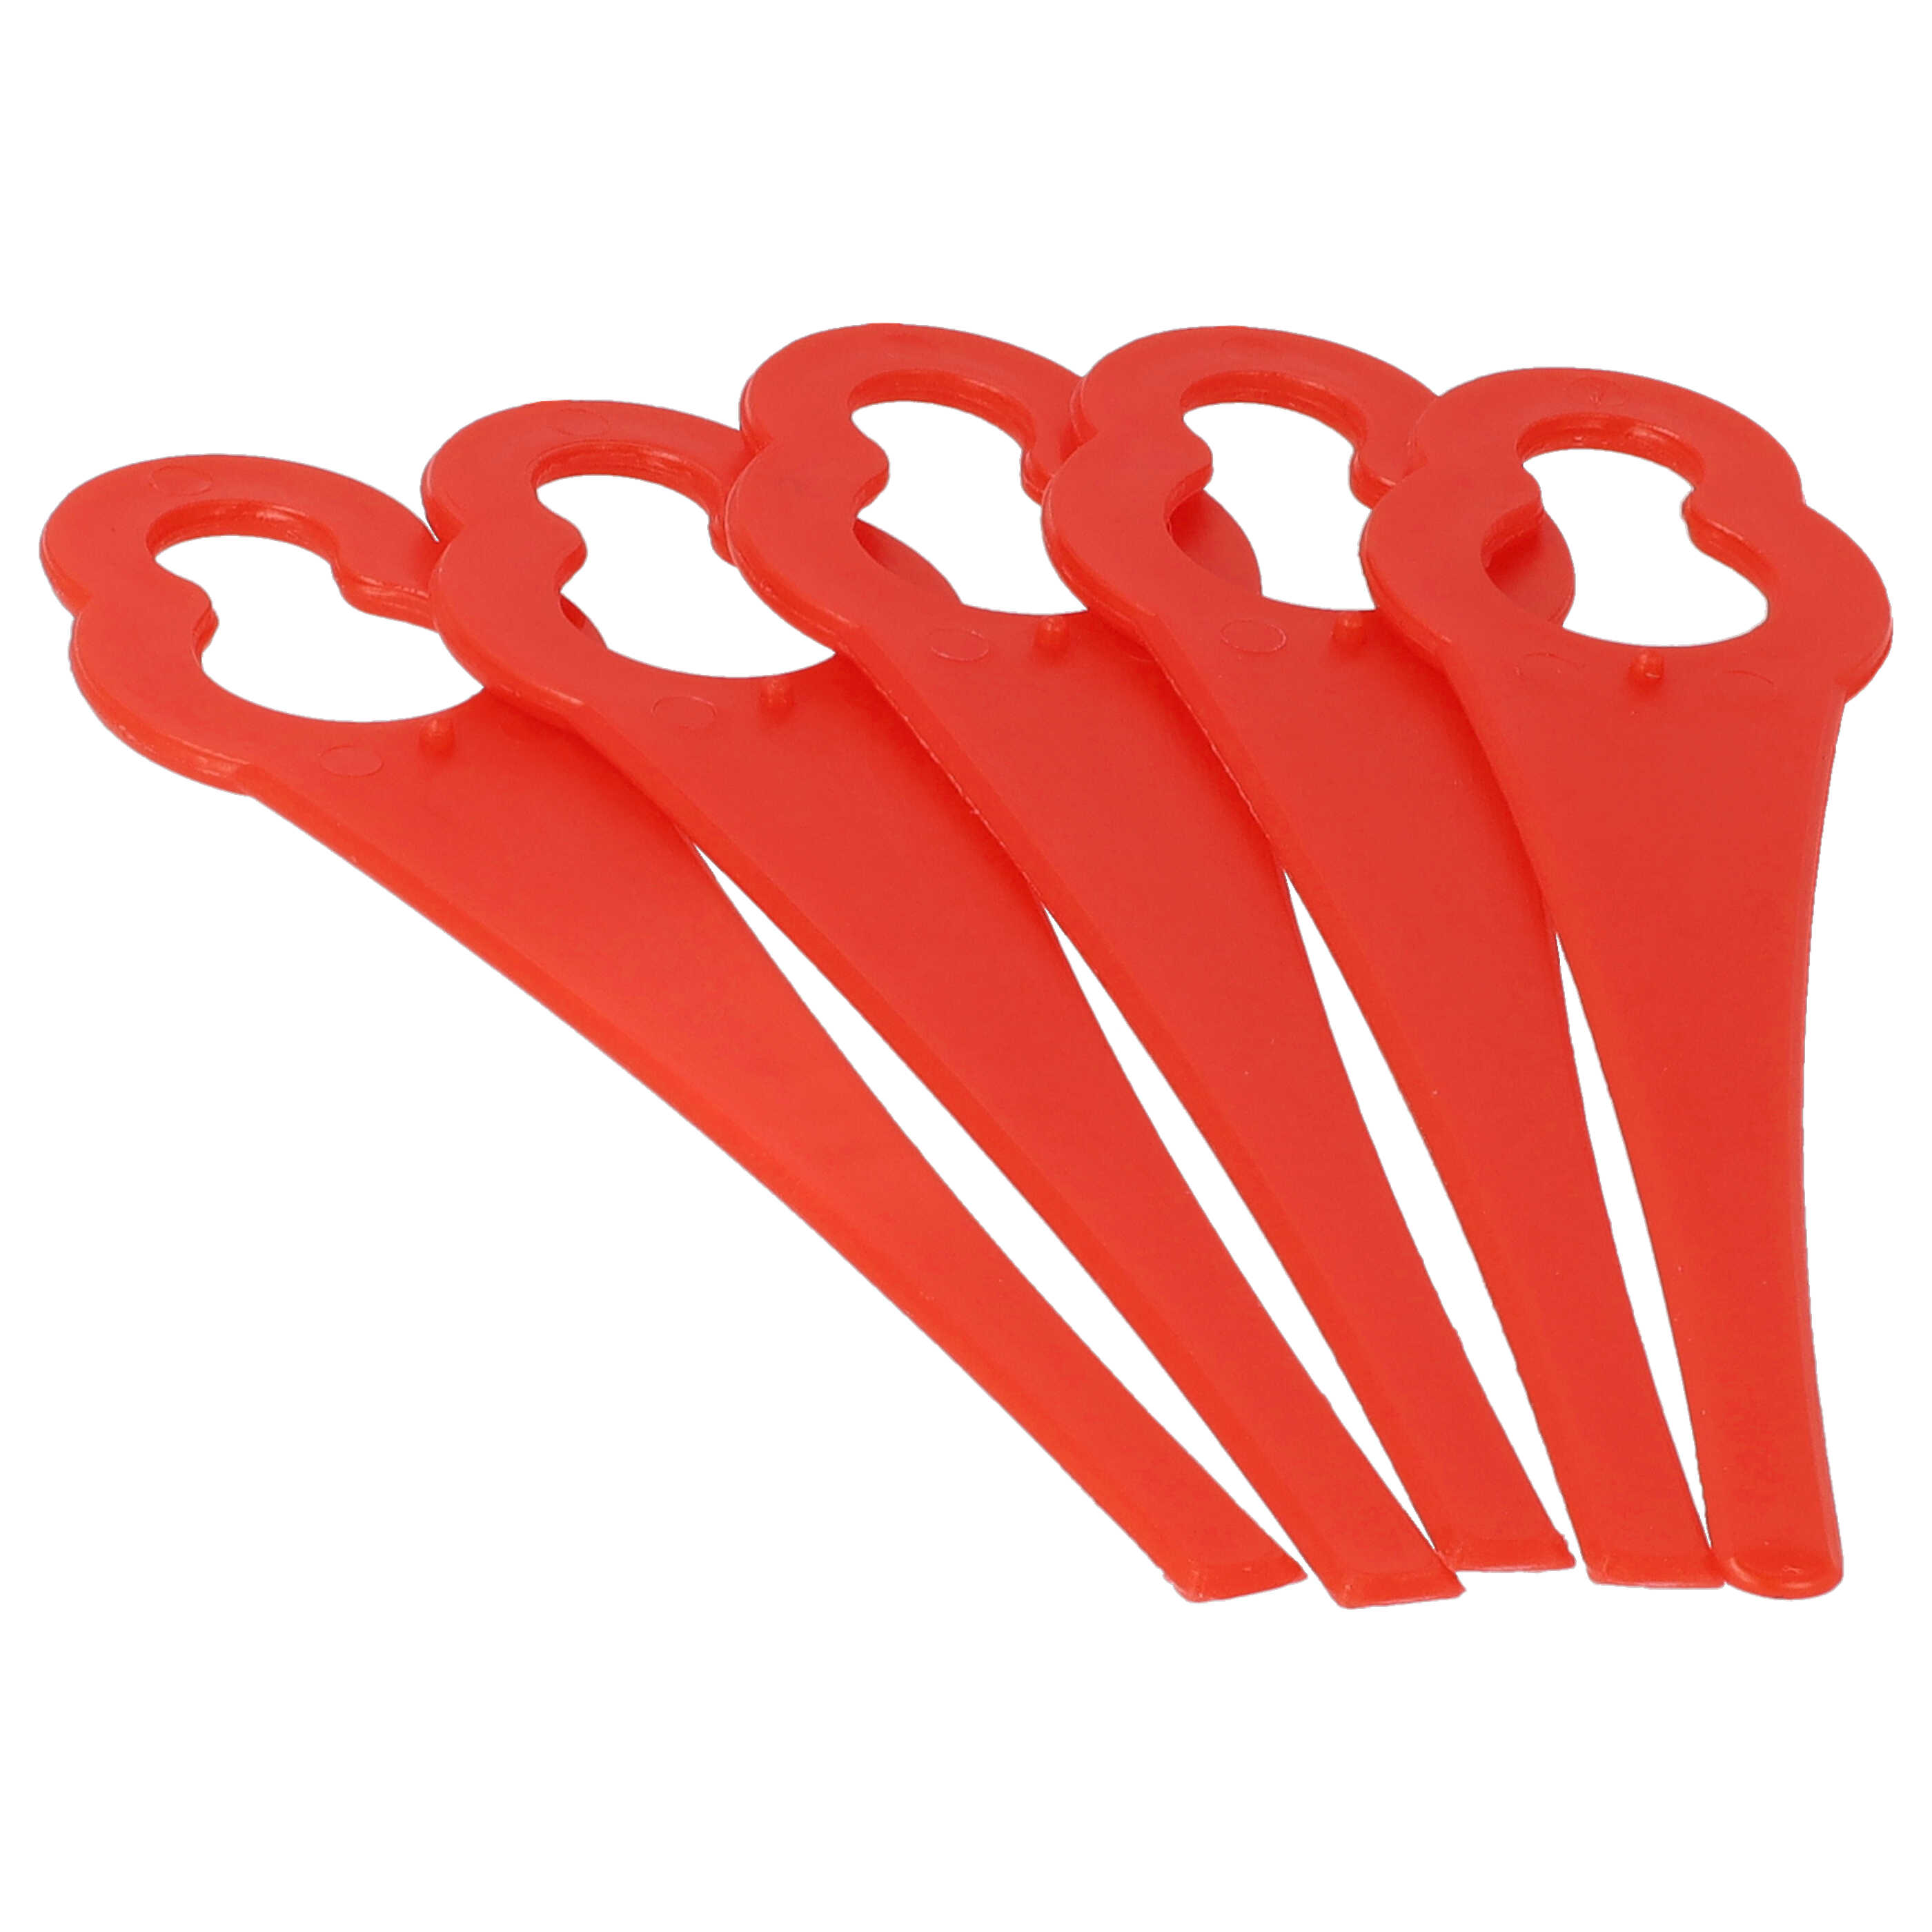 50x Exchange Blade replaces ALM BQ026 for Cordless Strimmer etc. - nylon / plastic, red